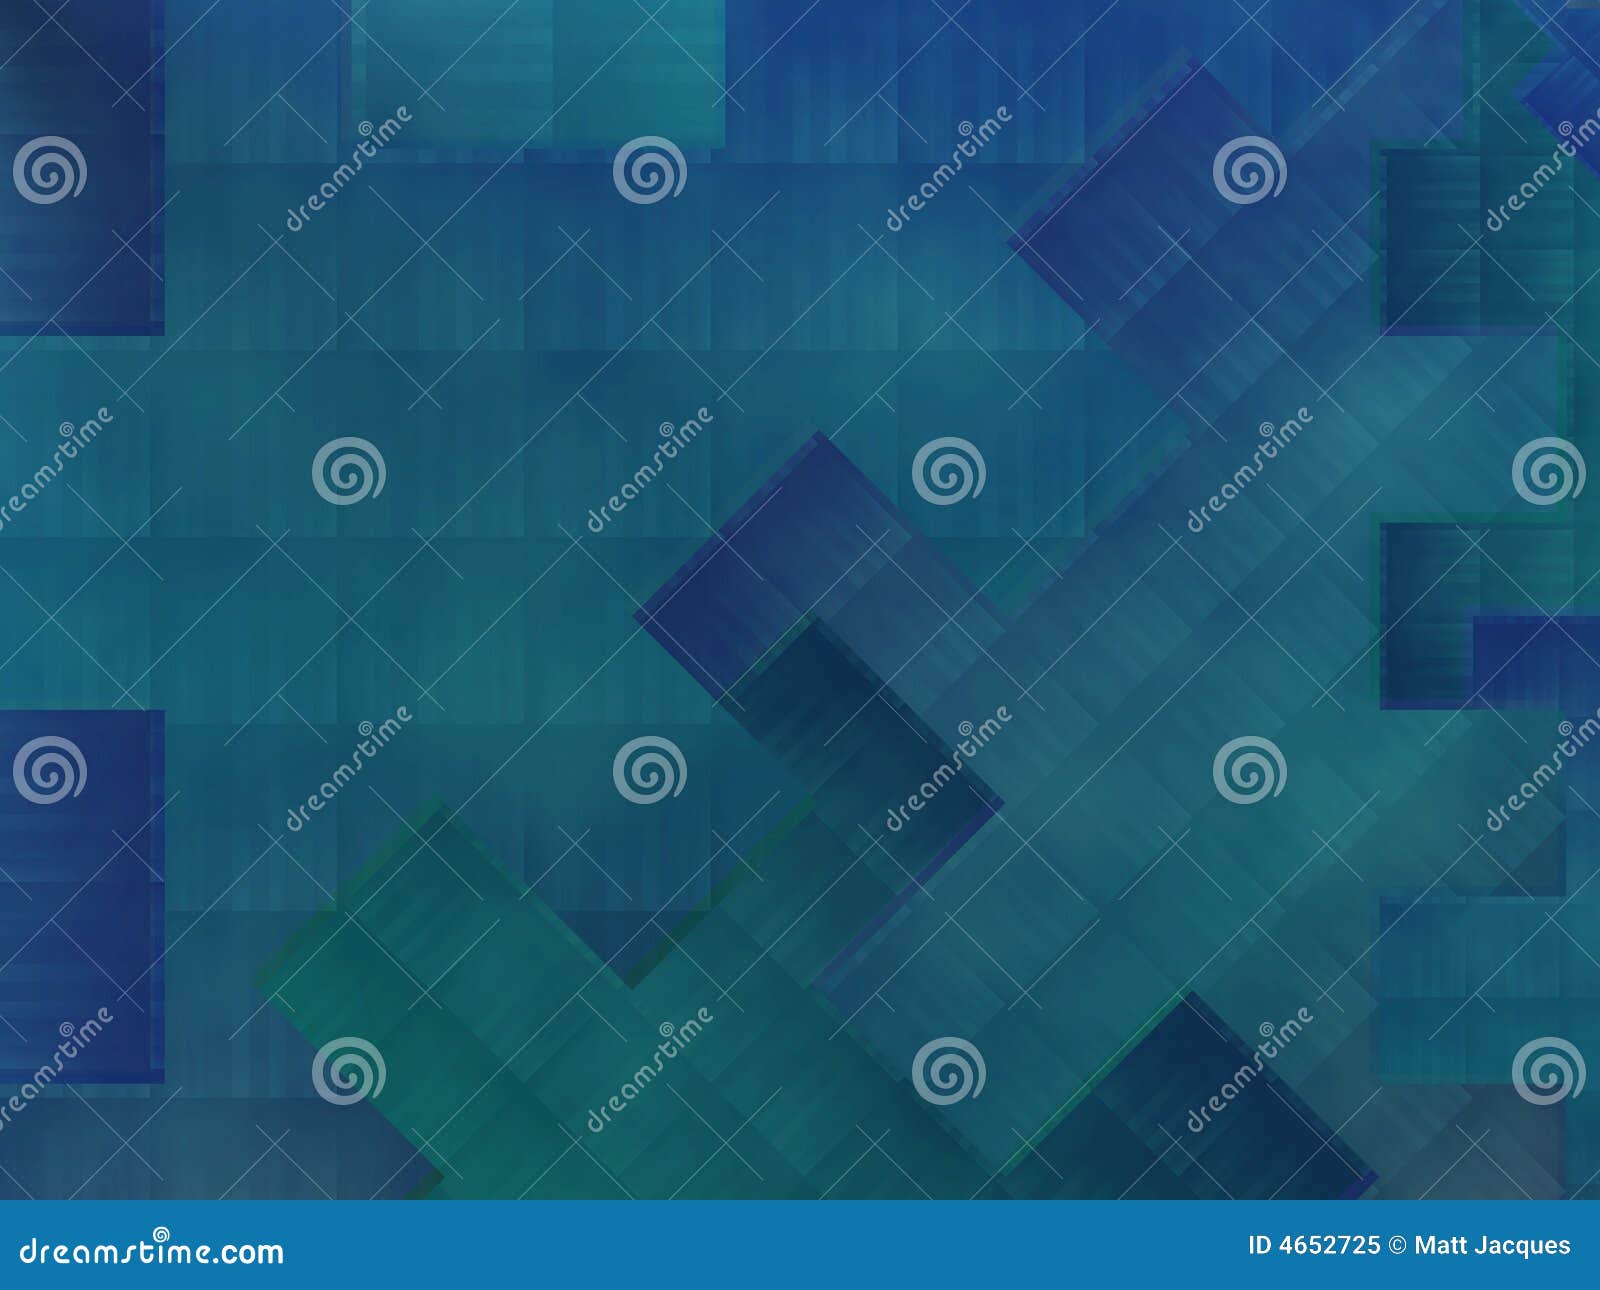 Abstract Puzzle Pieces Background Stock Illustration - Illustration of